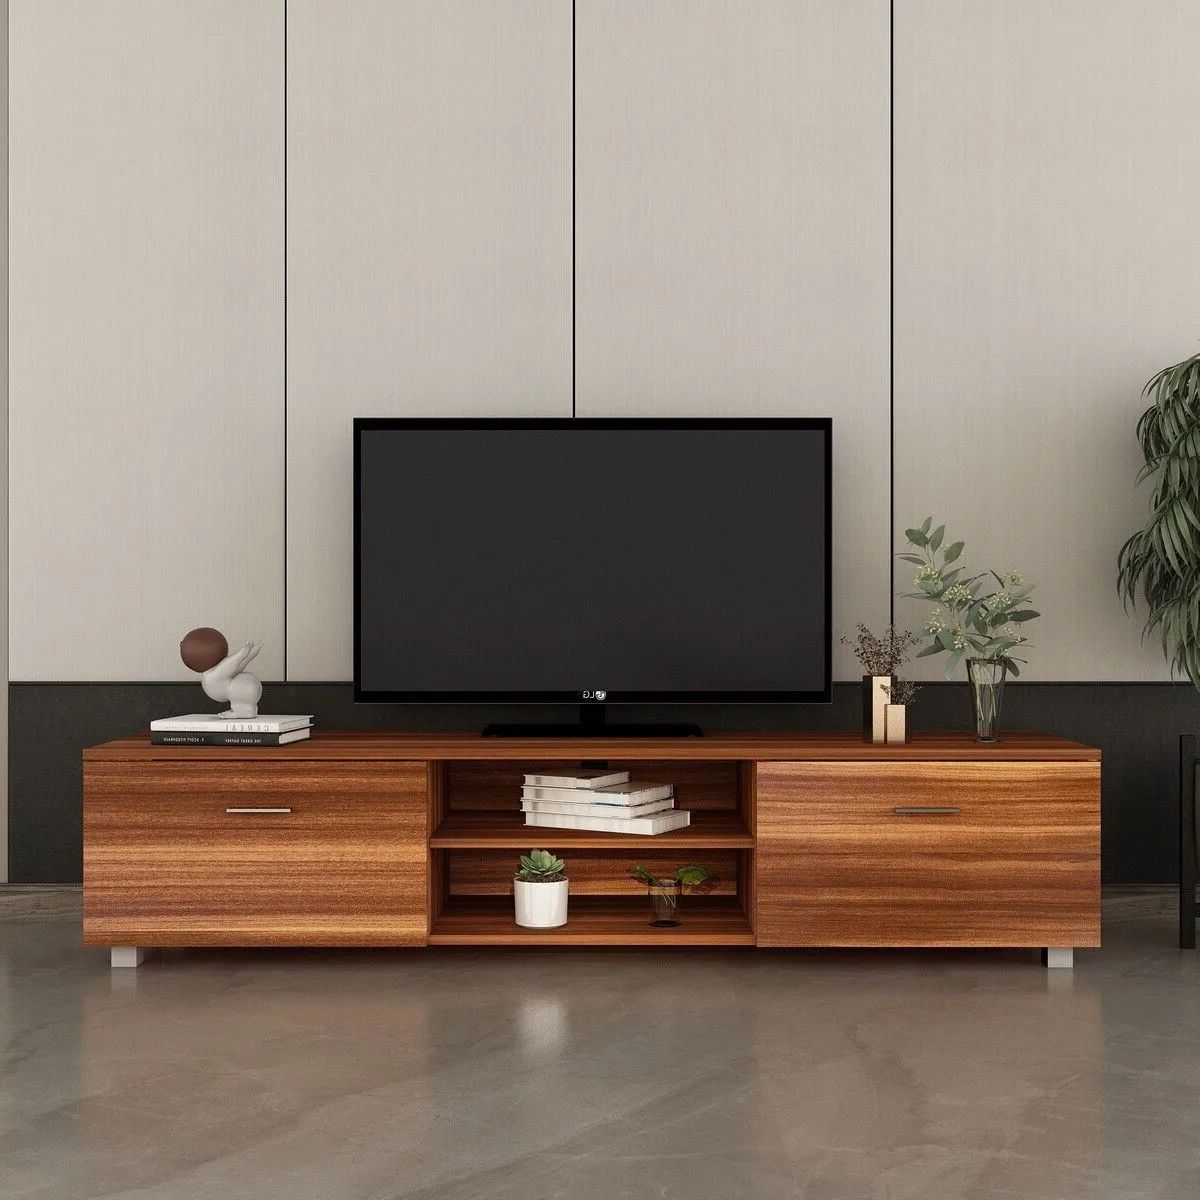 Tv Stand Media Entertainment Center For Tv's Up To 70" W/ Storage Cabinet  Walnut | Ebay Pertaining To Walnut Entertainment Centers (View 17 of 20)